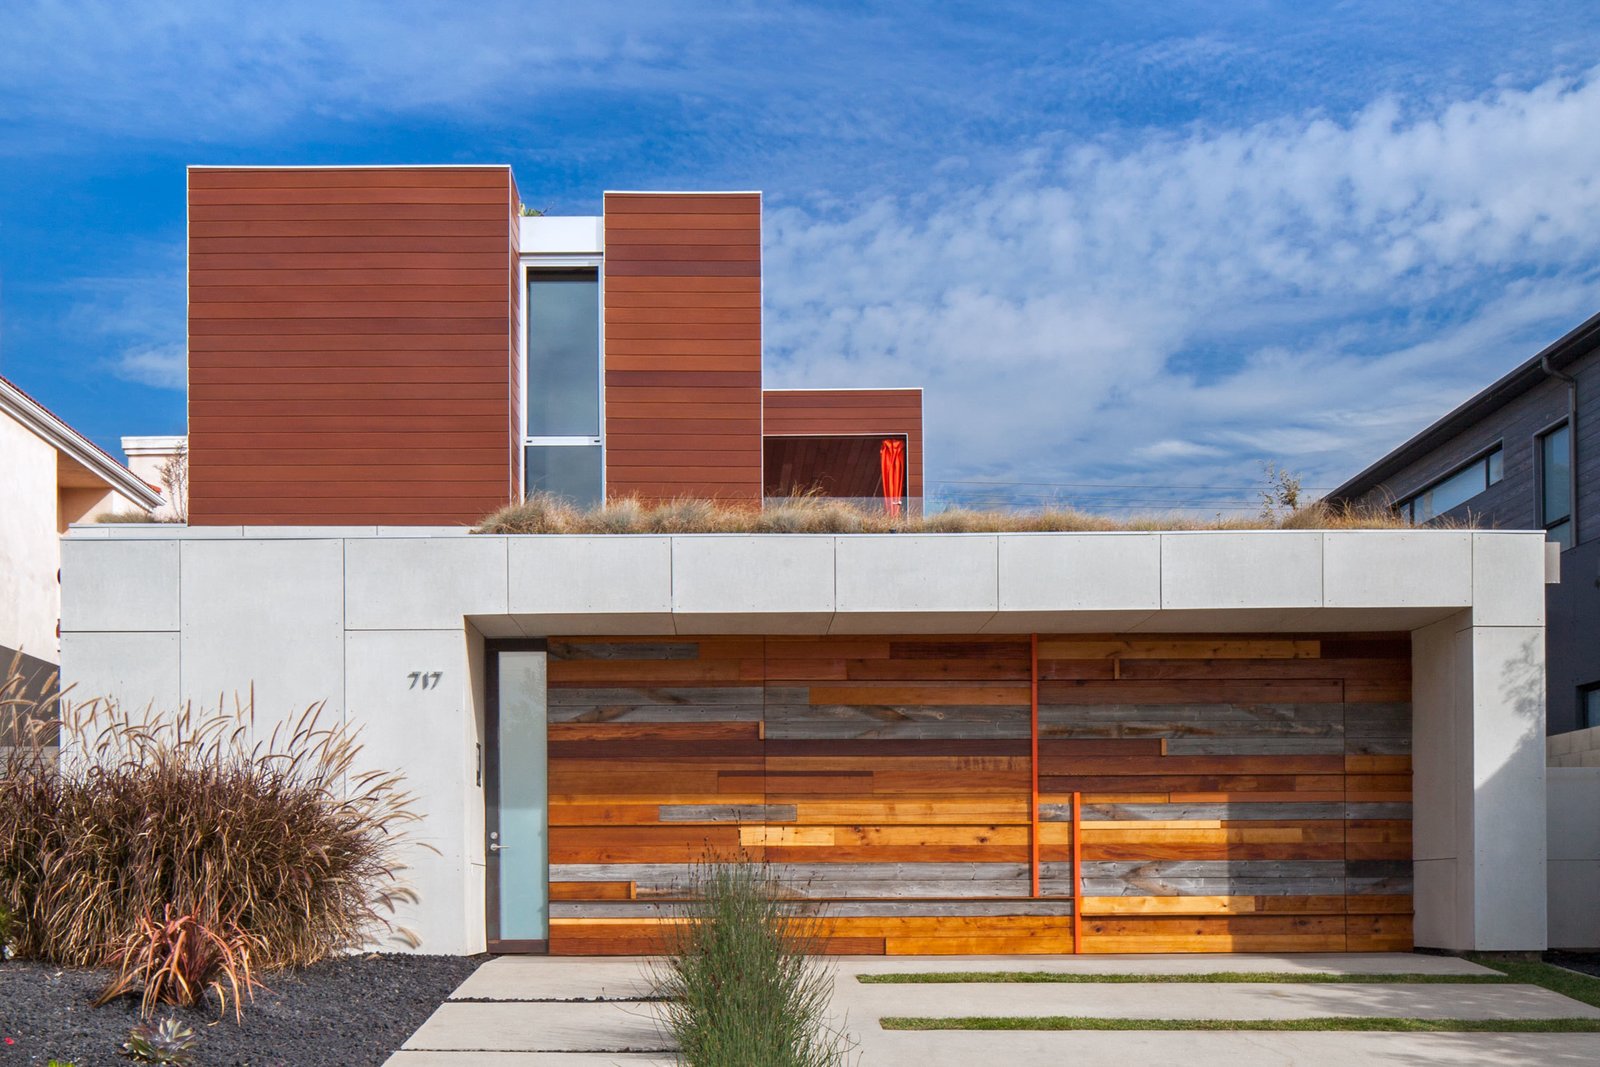 Efficient Prefab Panels Form This Southern California Abode